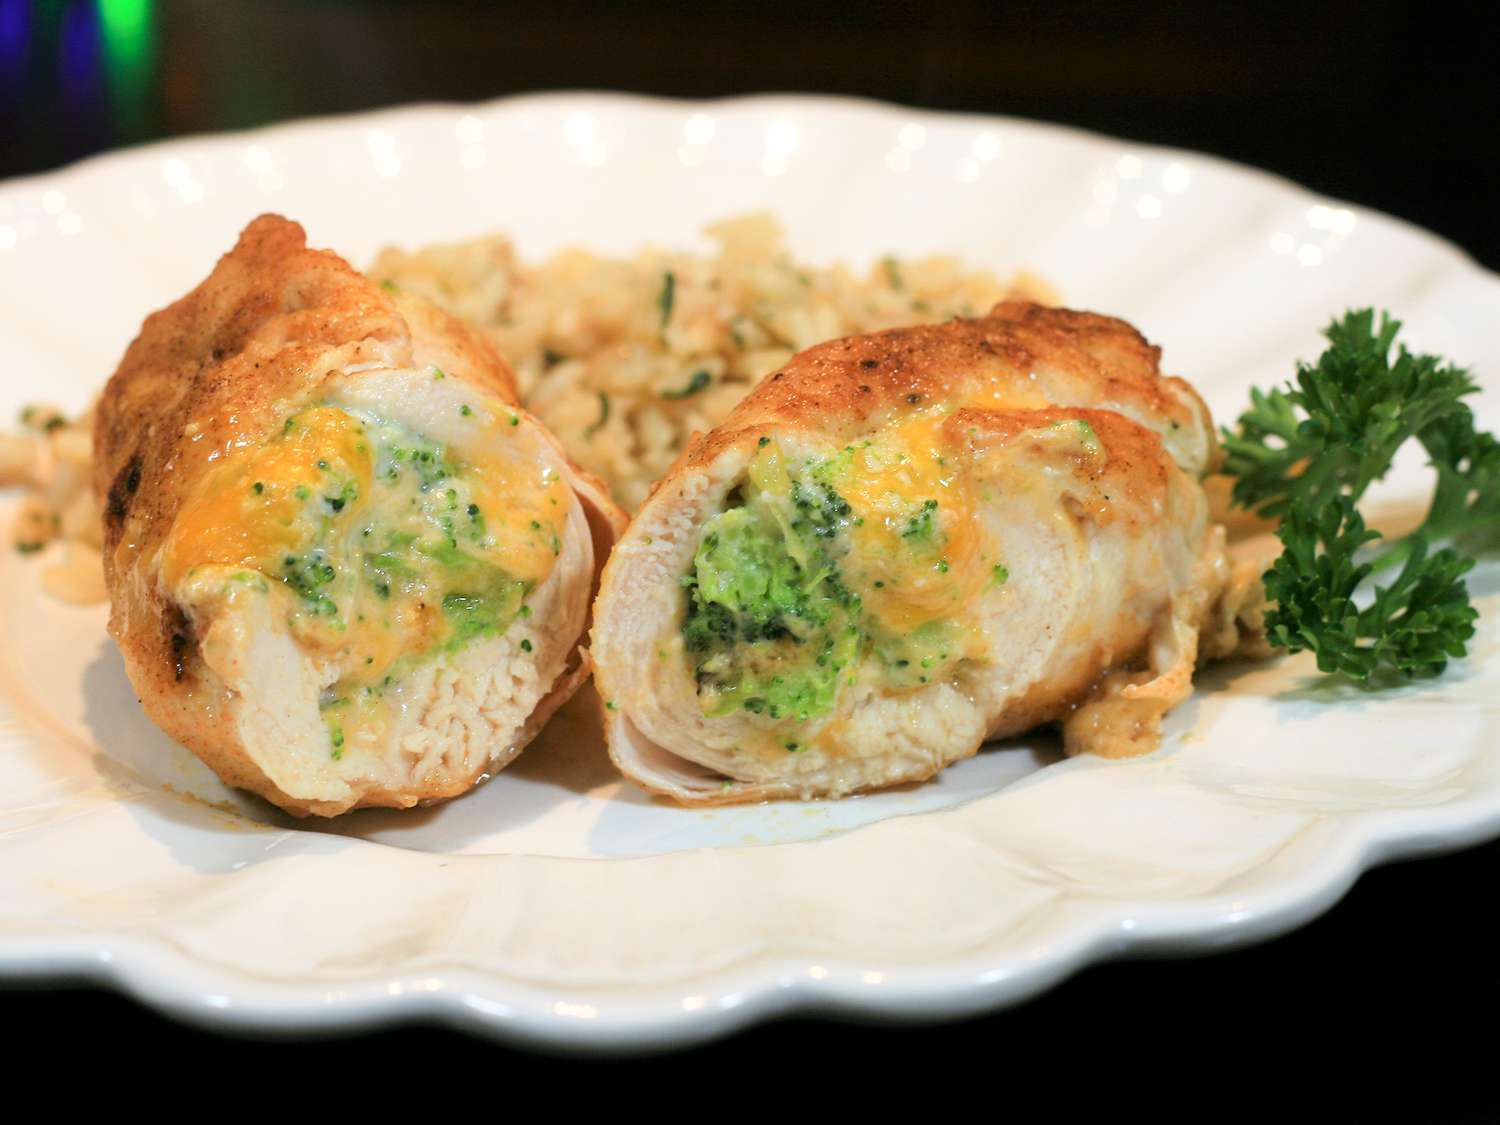 close up view of a sliced Broccoli Cheese Stuffed Chicken served on a white plate with grains and fresh herbs